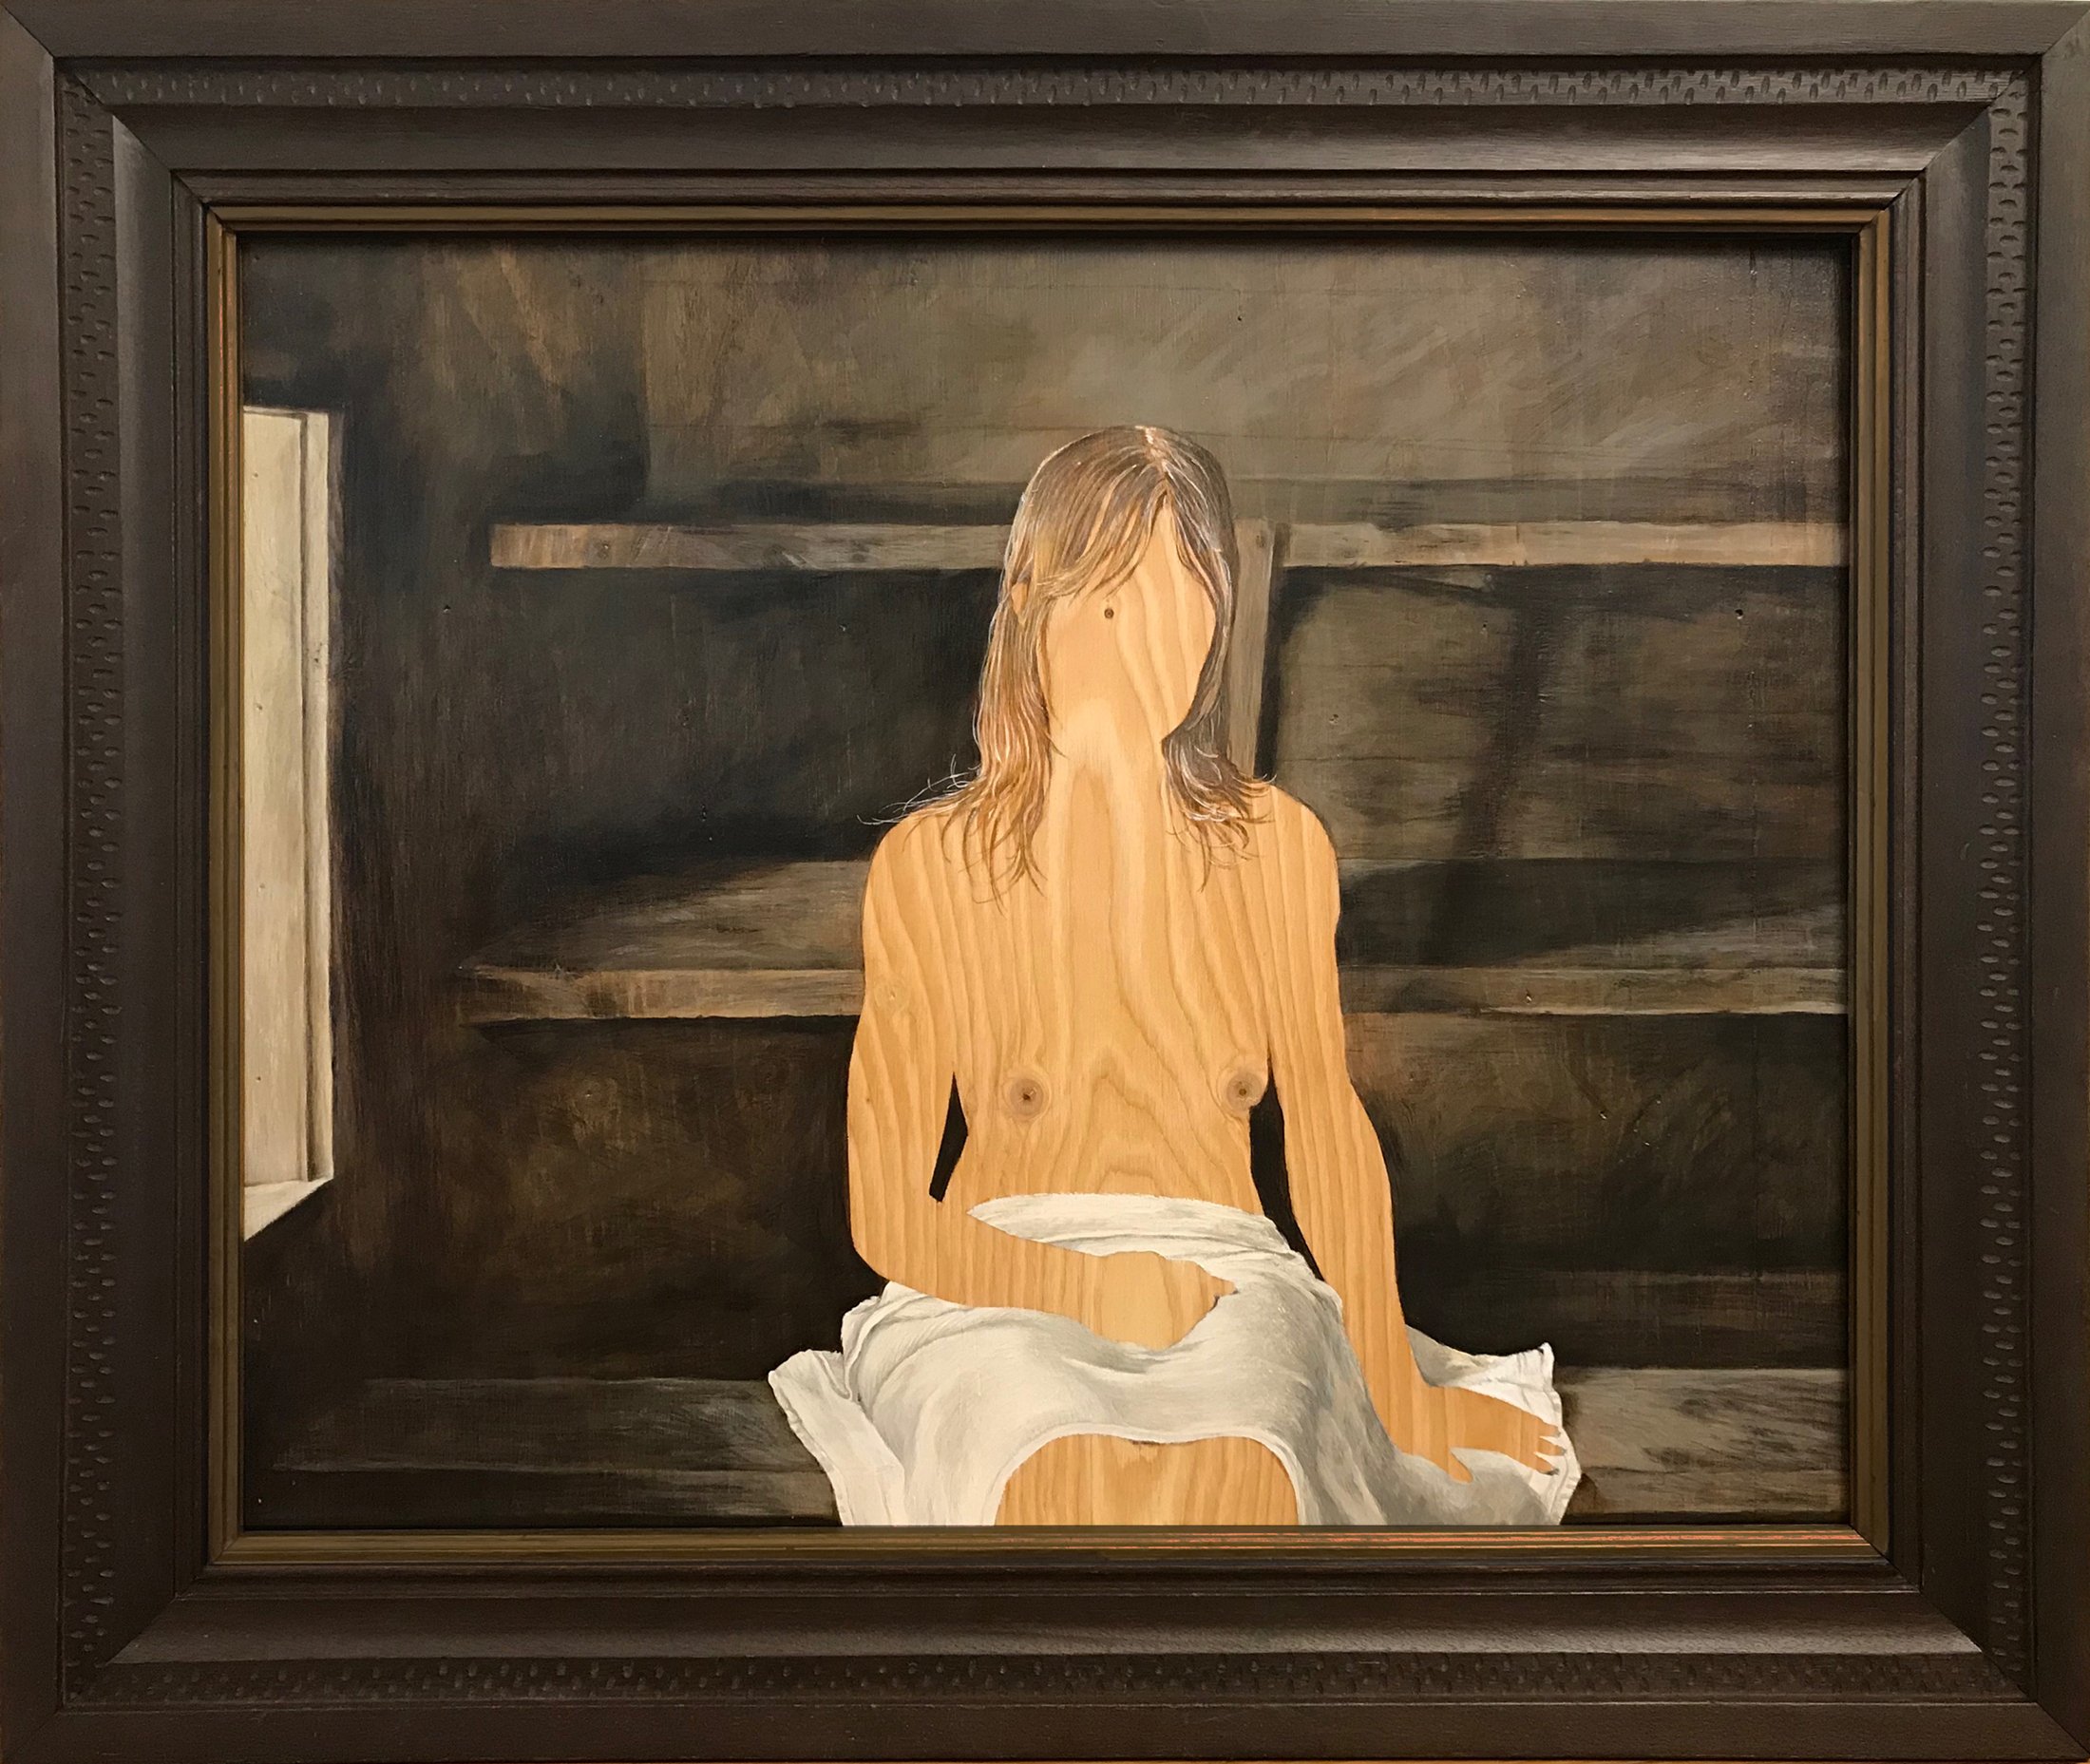 LCharters_From The Missing Women Series, Wyeth's Sauna Muse.jpg